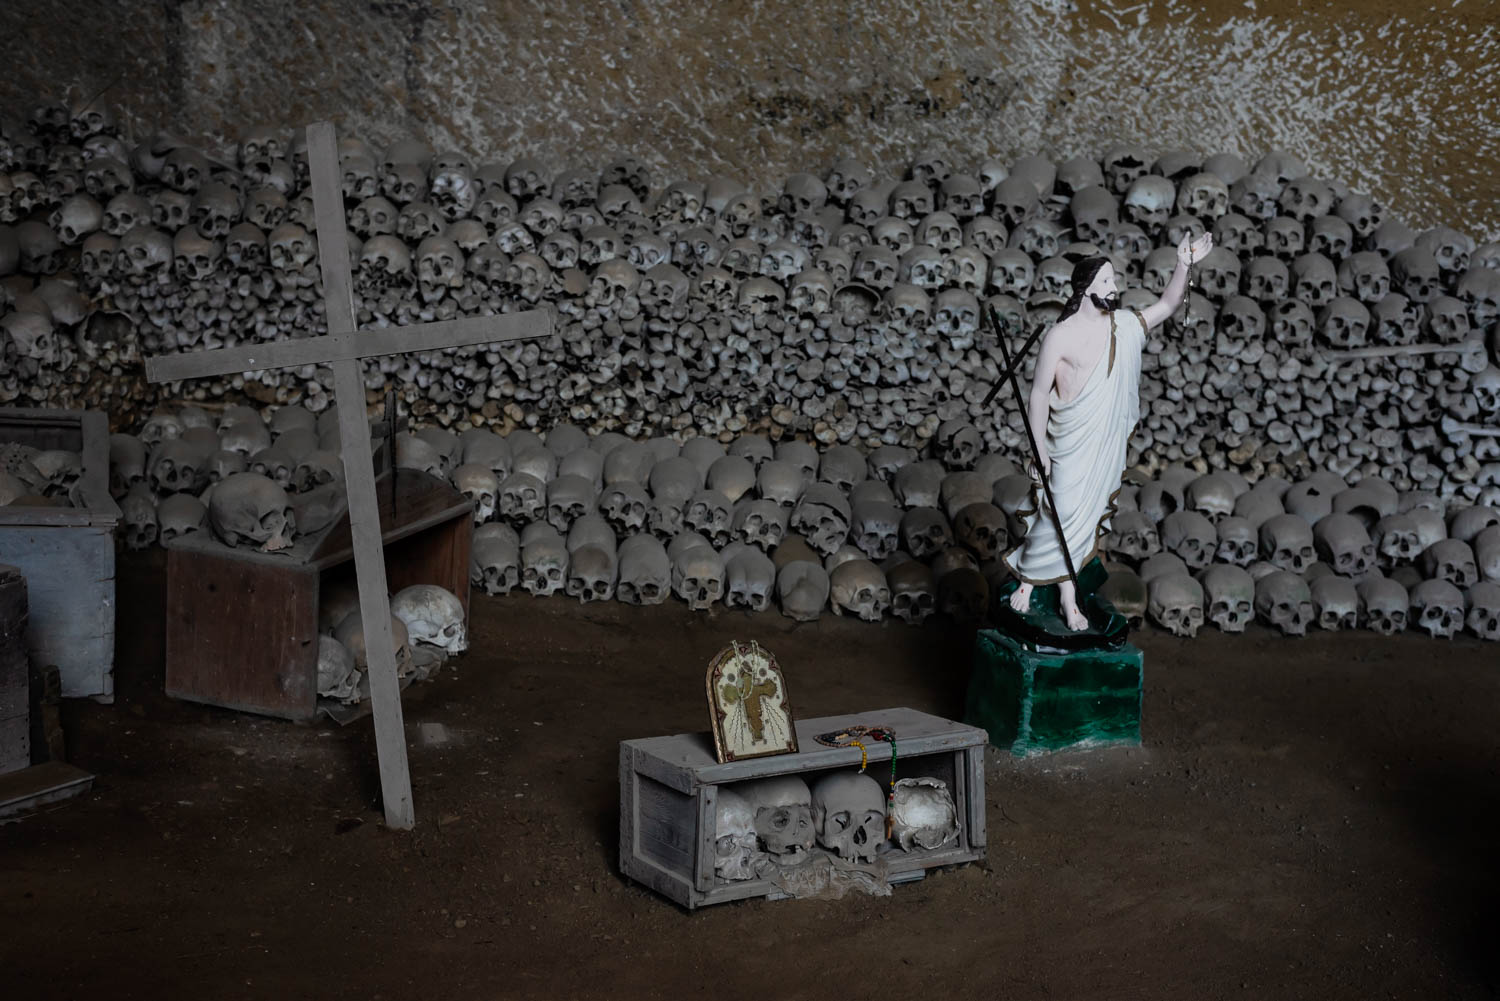  In 1872 Don Gaetano Barbati, a local priest, and the community members cleaned and rearranged the huge number of skulls and bones and put them in order throughout the various spaces in the cavity. Since then, there has been a very strong devotion fo